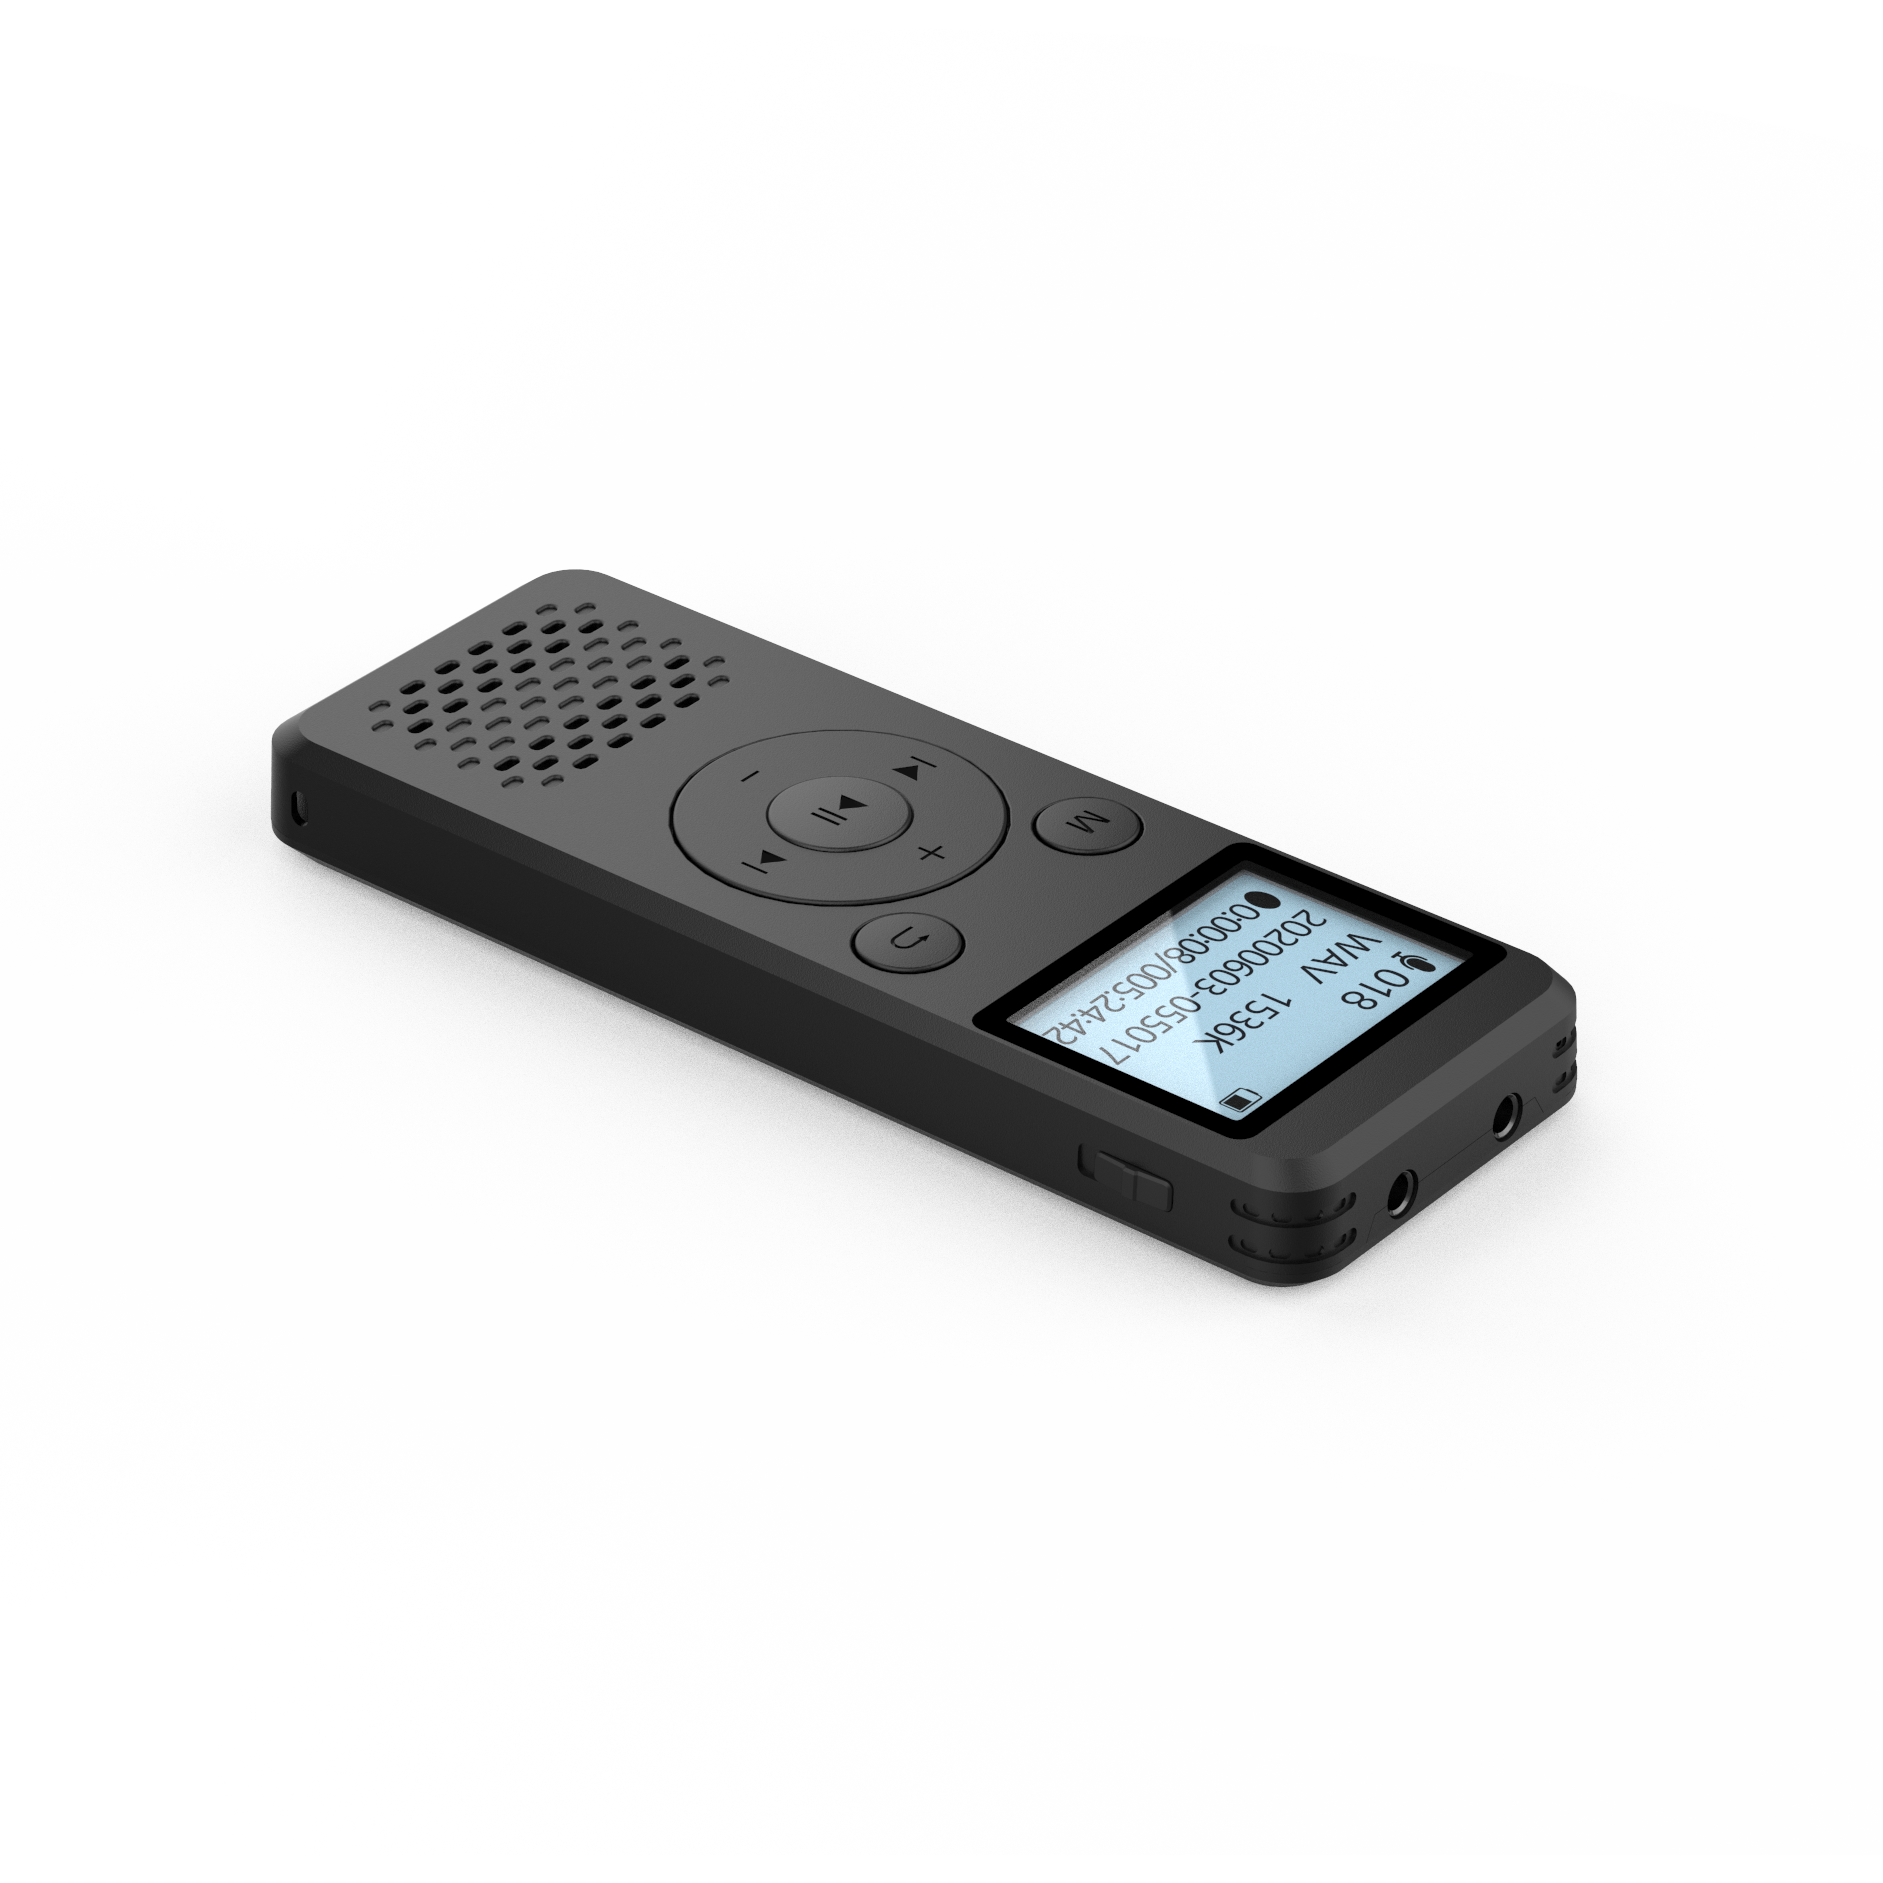 product-Hnsat-Digital Voice Recorder Spy Voice Recorder Built in 8GB Flash Memory Telephone Recordin